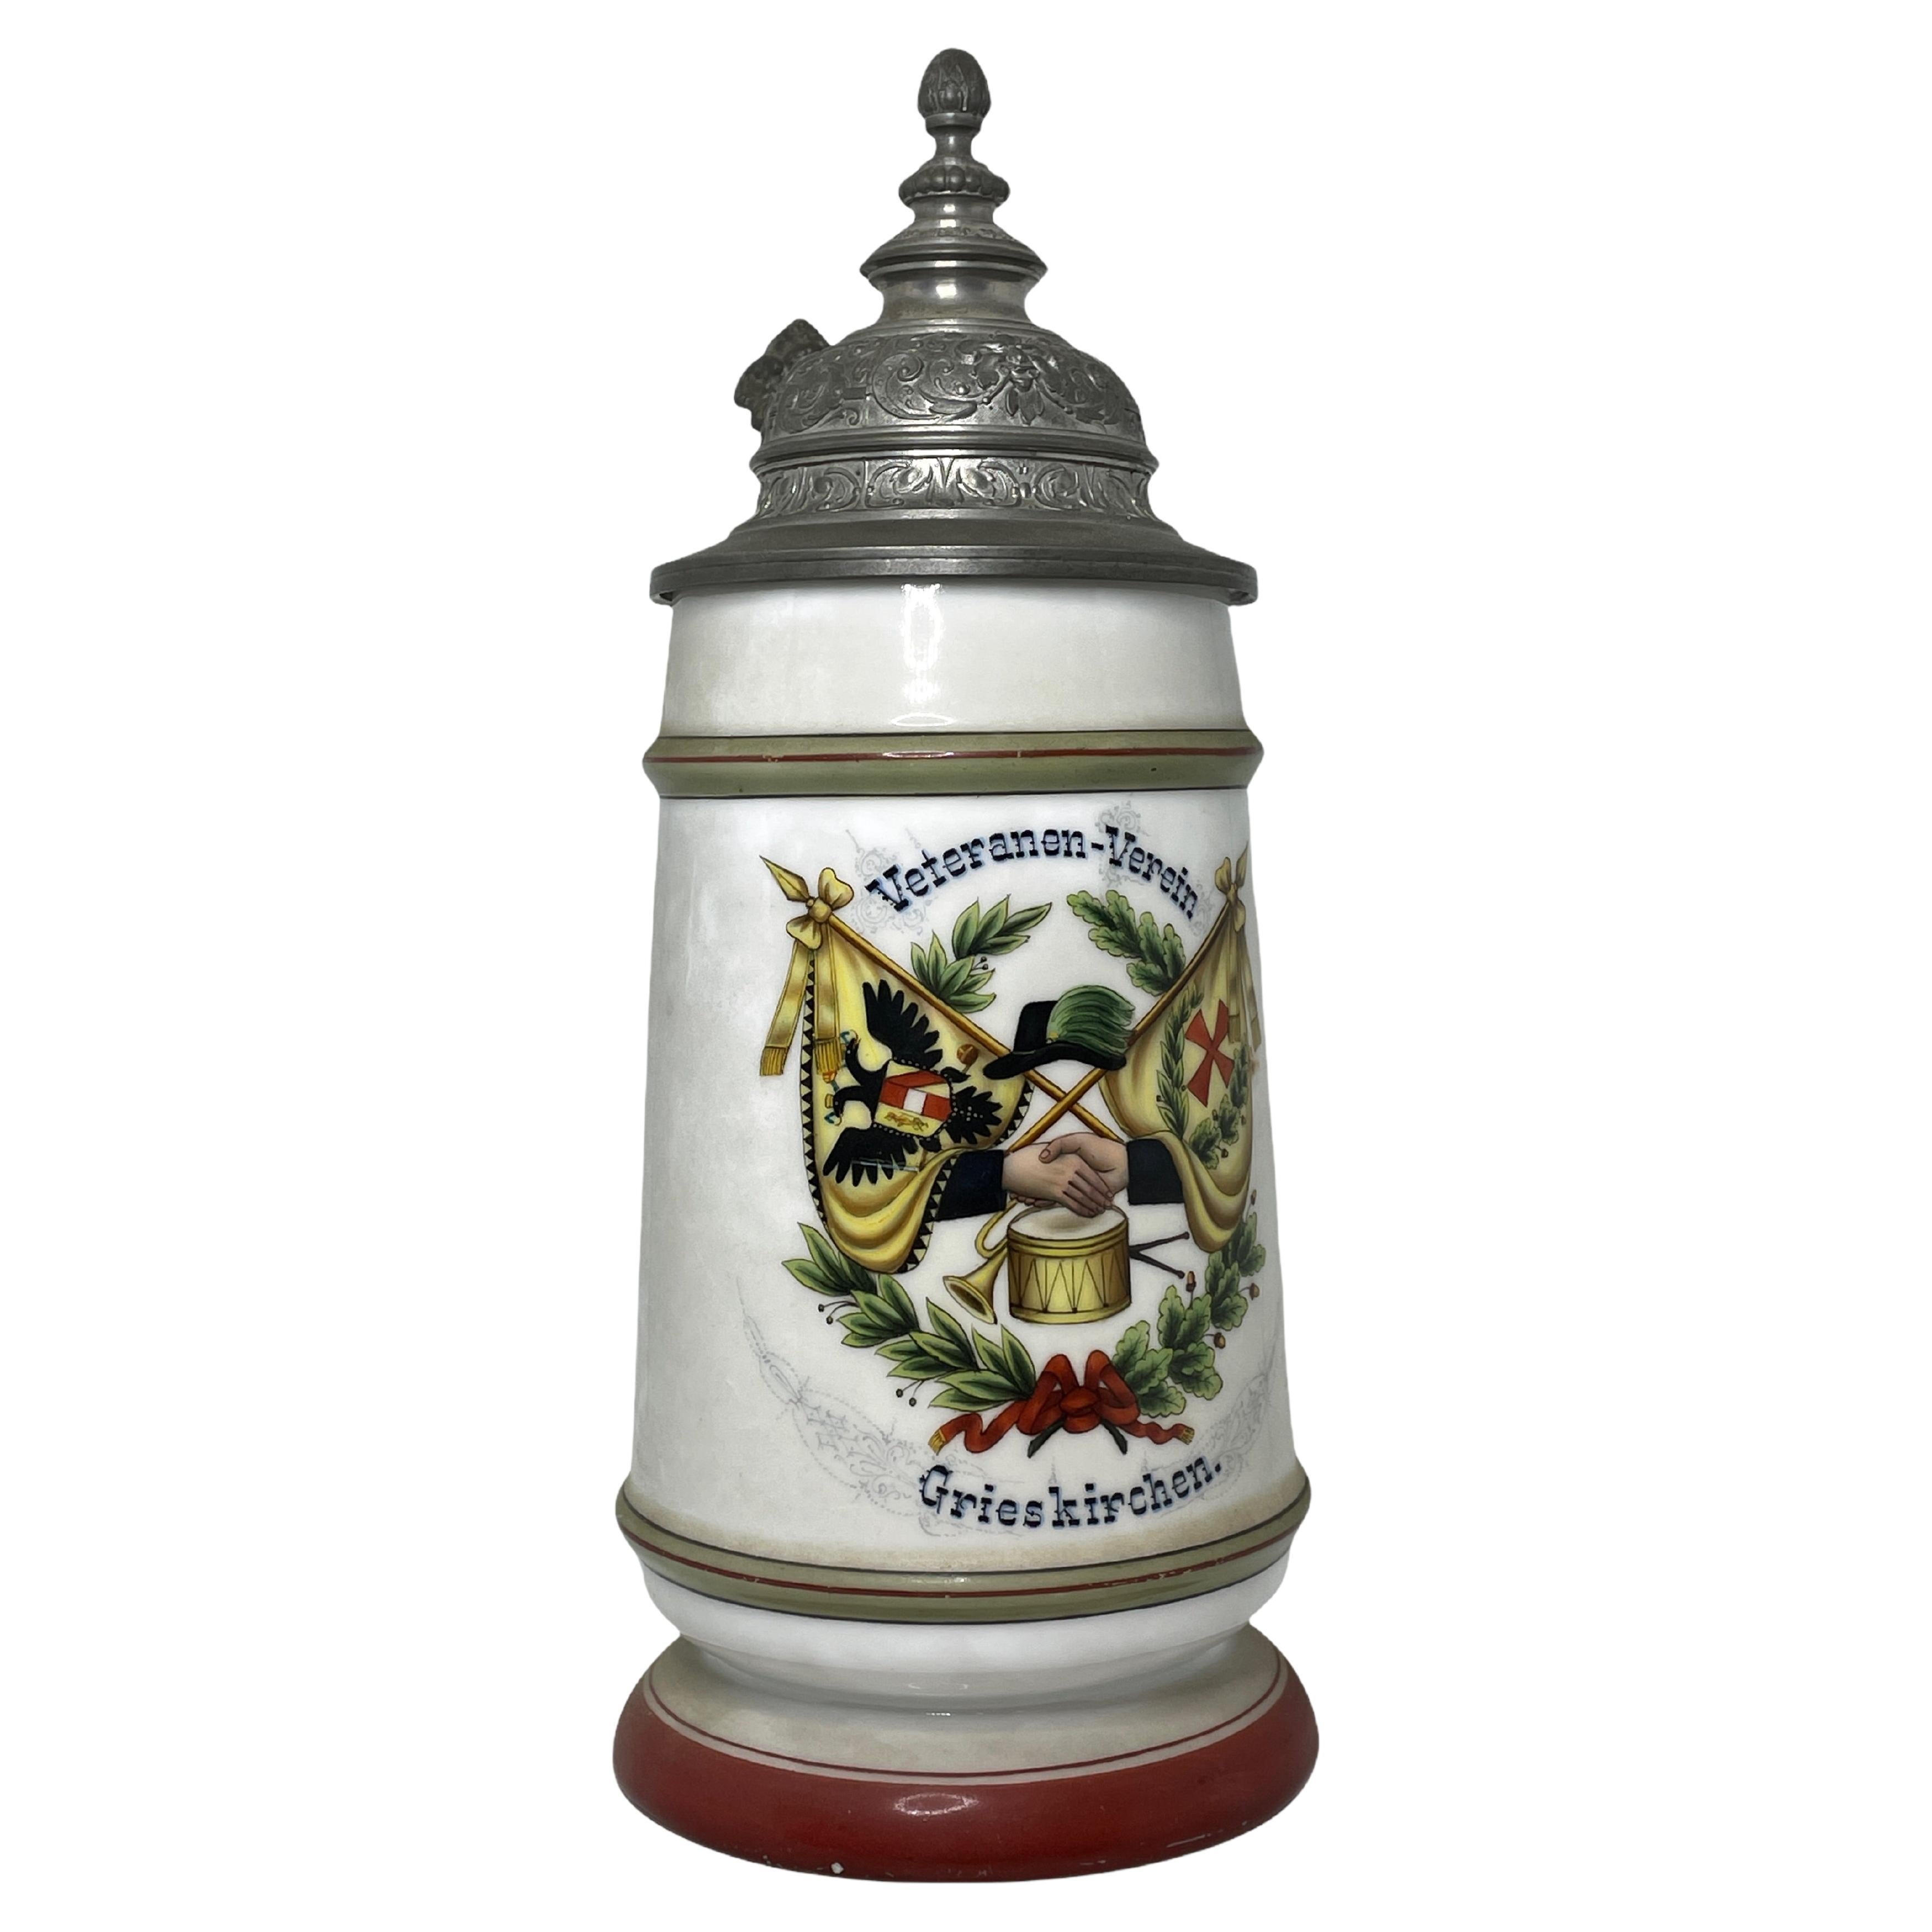 A gorgeous beer stein, made in Germany. This beer stein has been made in Germany, circa 1900s. Absolutely gorgeous piece still in great condition, without damage. Lid works properly. It is a 1 Liter Stein.